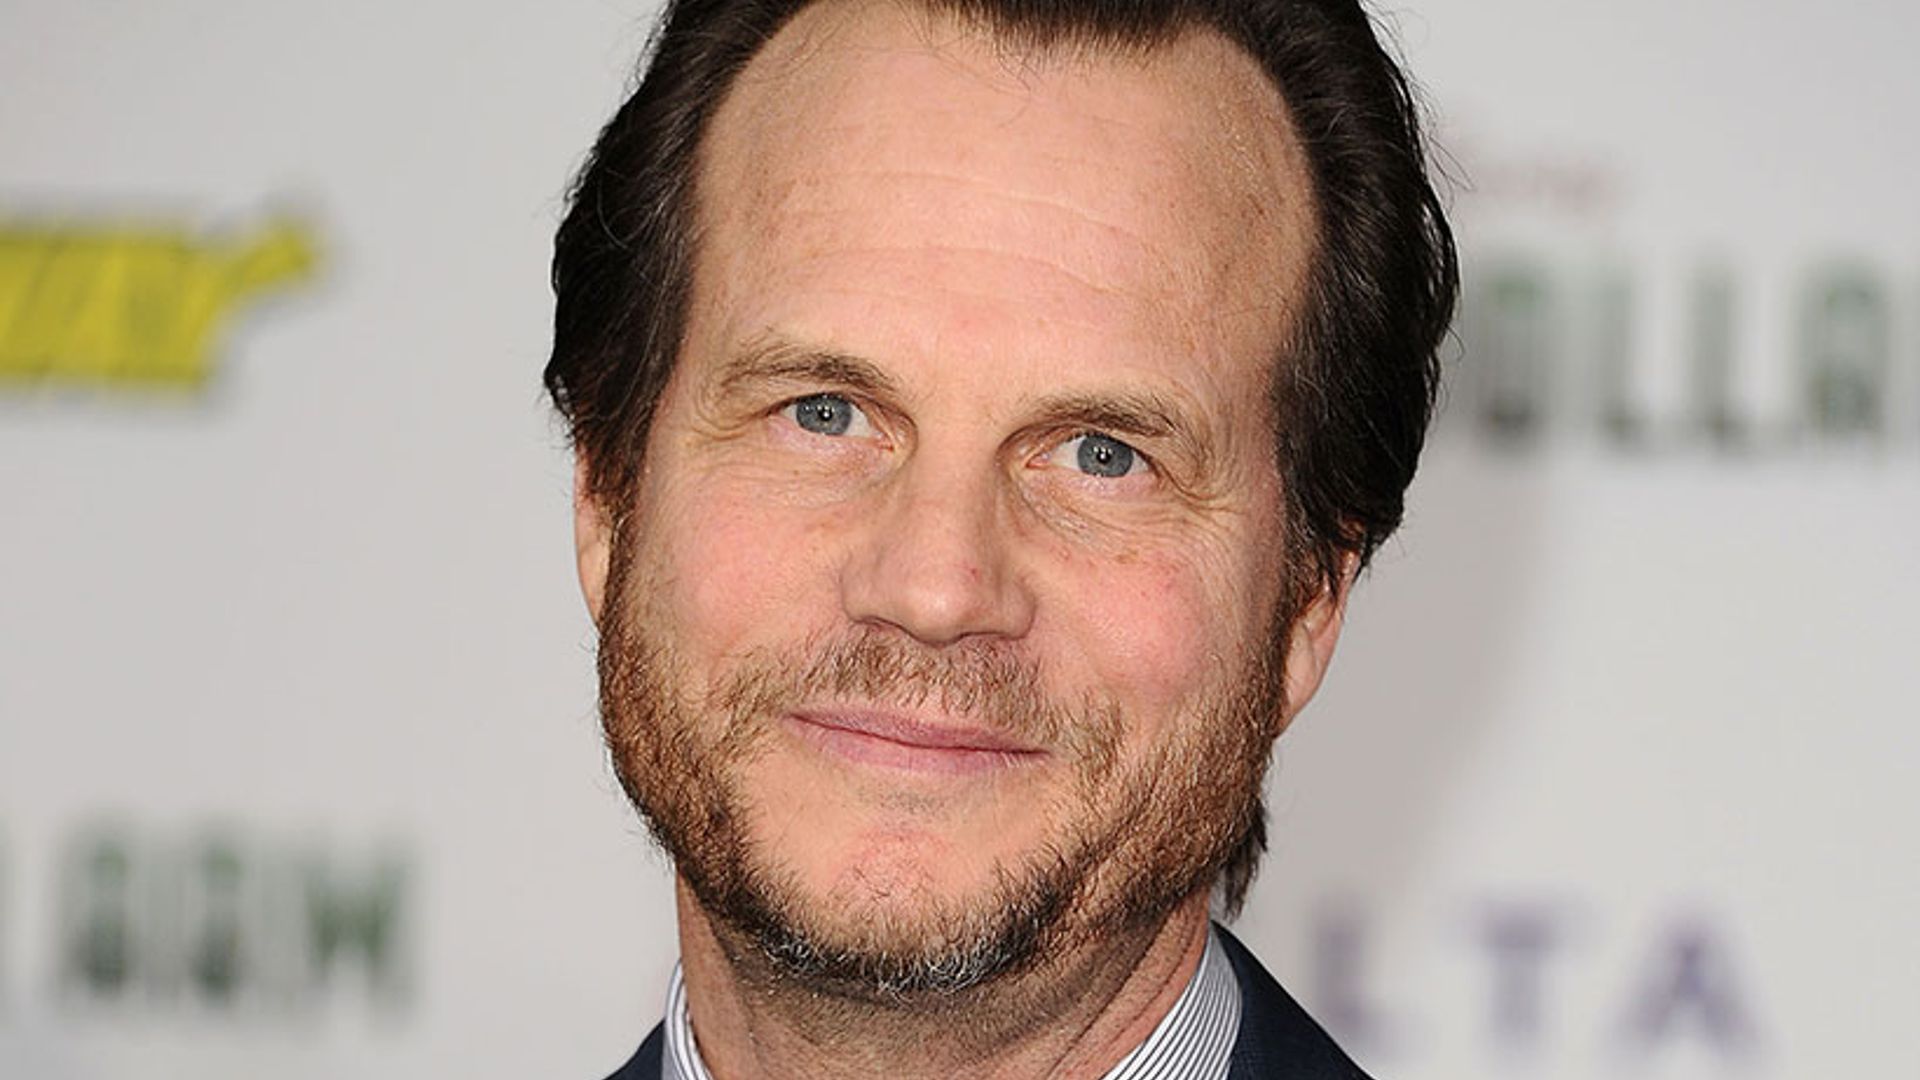 Bill Paxton dies at 61 – Hollywood mourns the death of a “wonderful man”